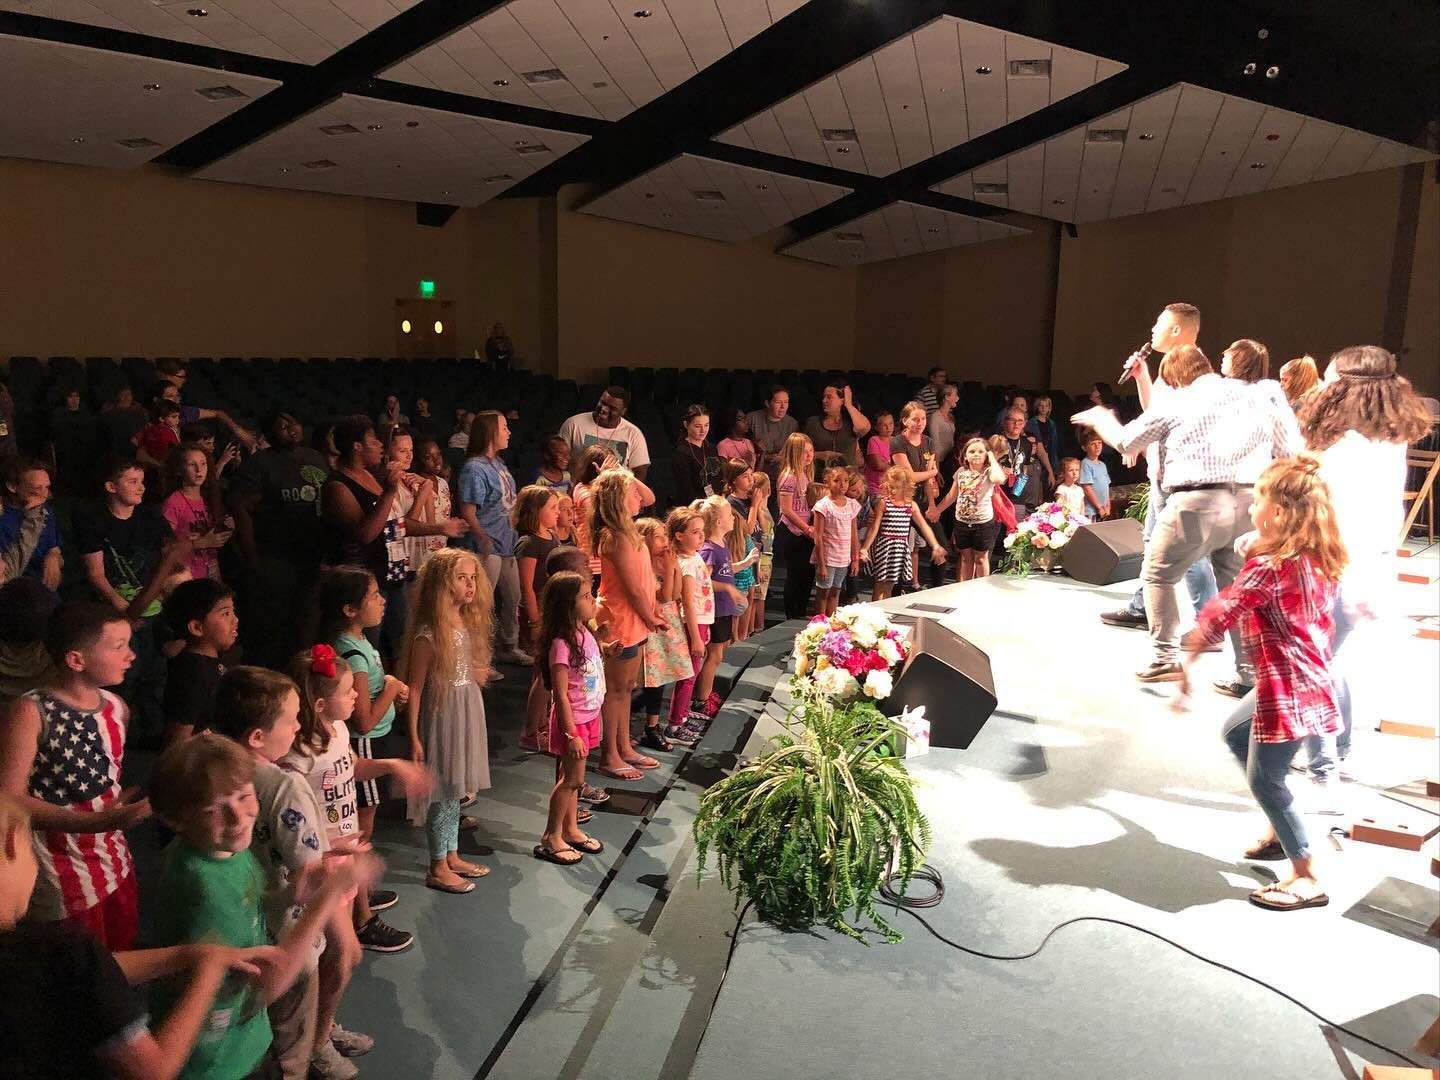 Summer is almost here! That means it&rsquo;s VBS, camp, and missions trip season! We&rsquo;ve been praying, planning, and listening to the Lord, and are gearing up for an awesome summer of activities, outreaches, discipleship, and memories!